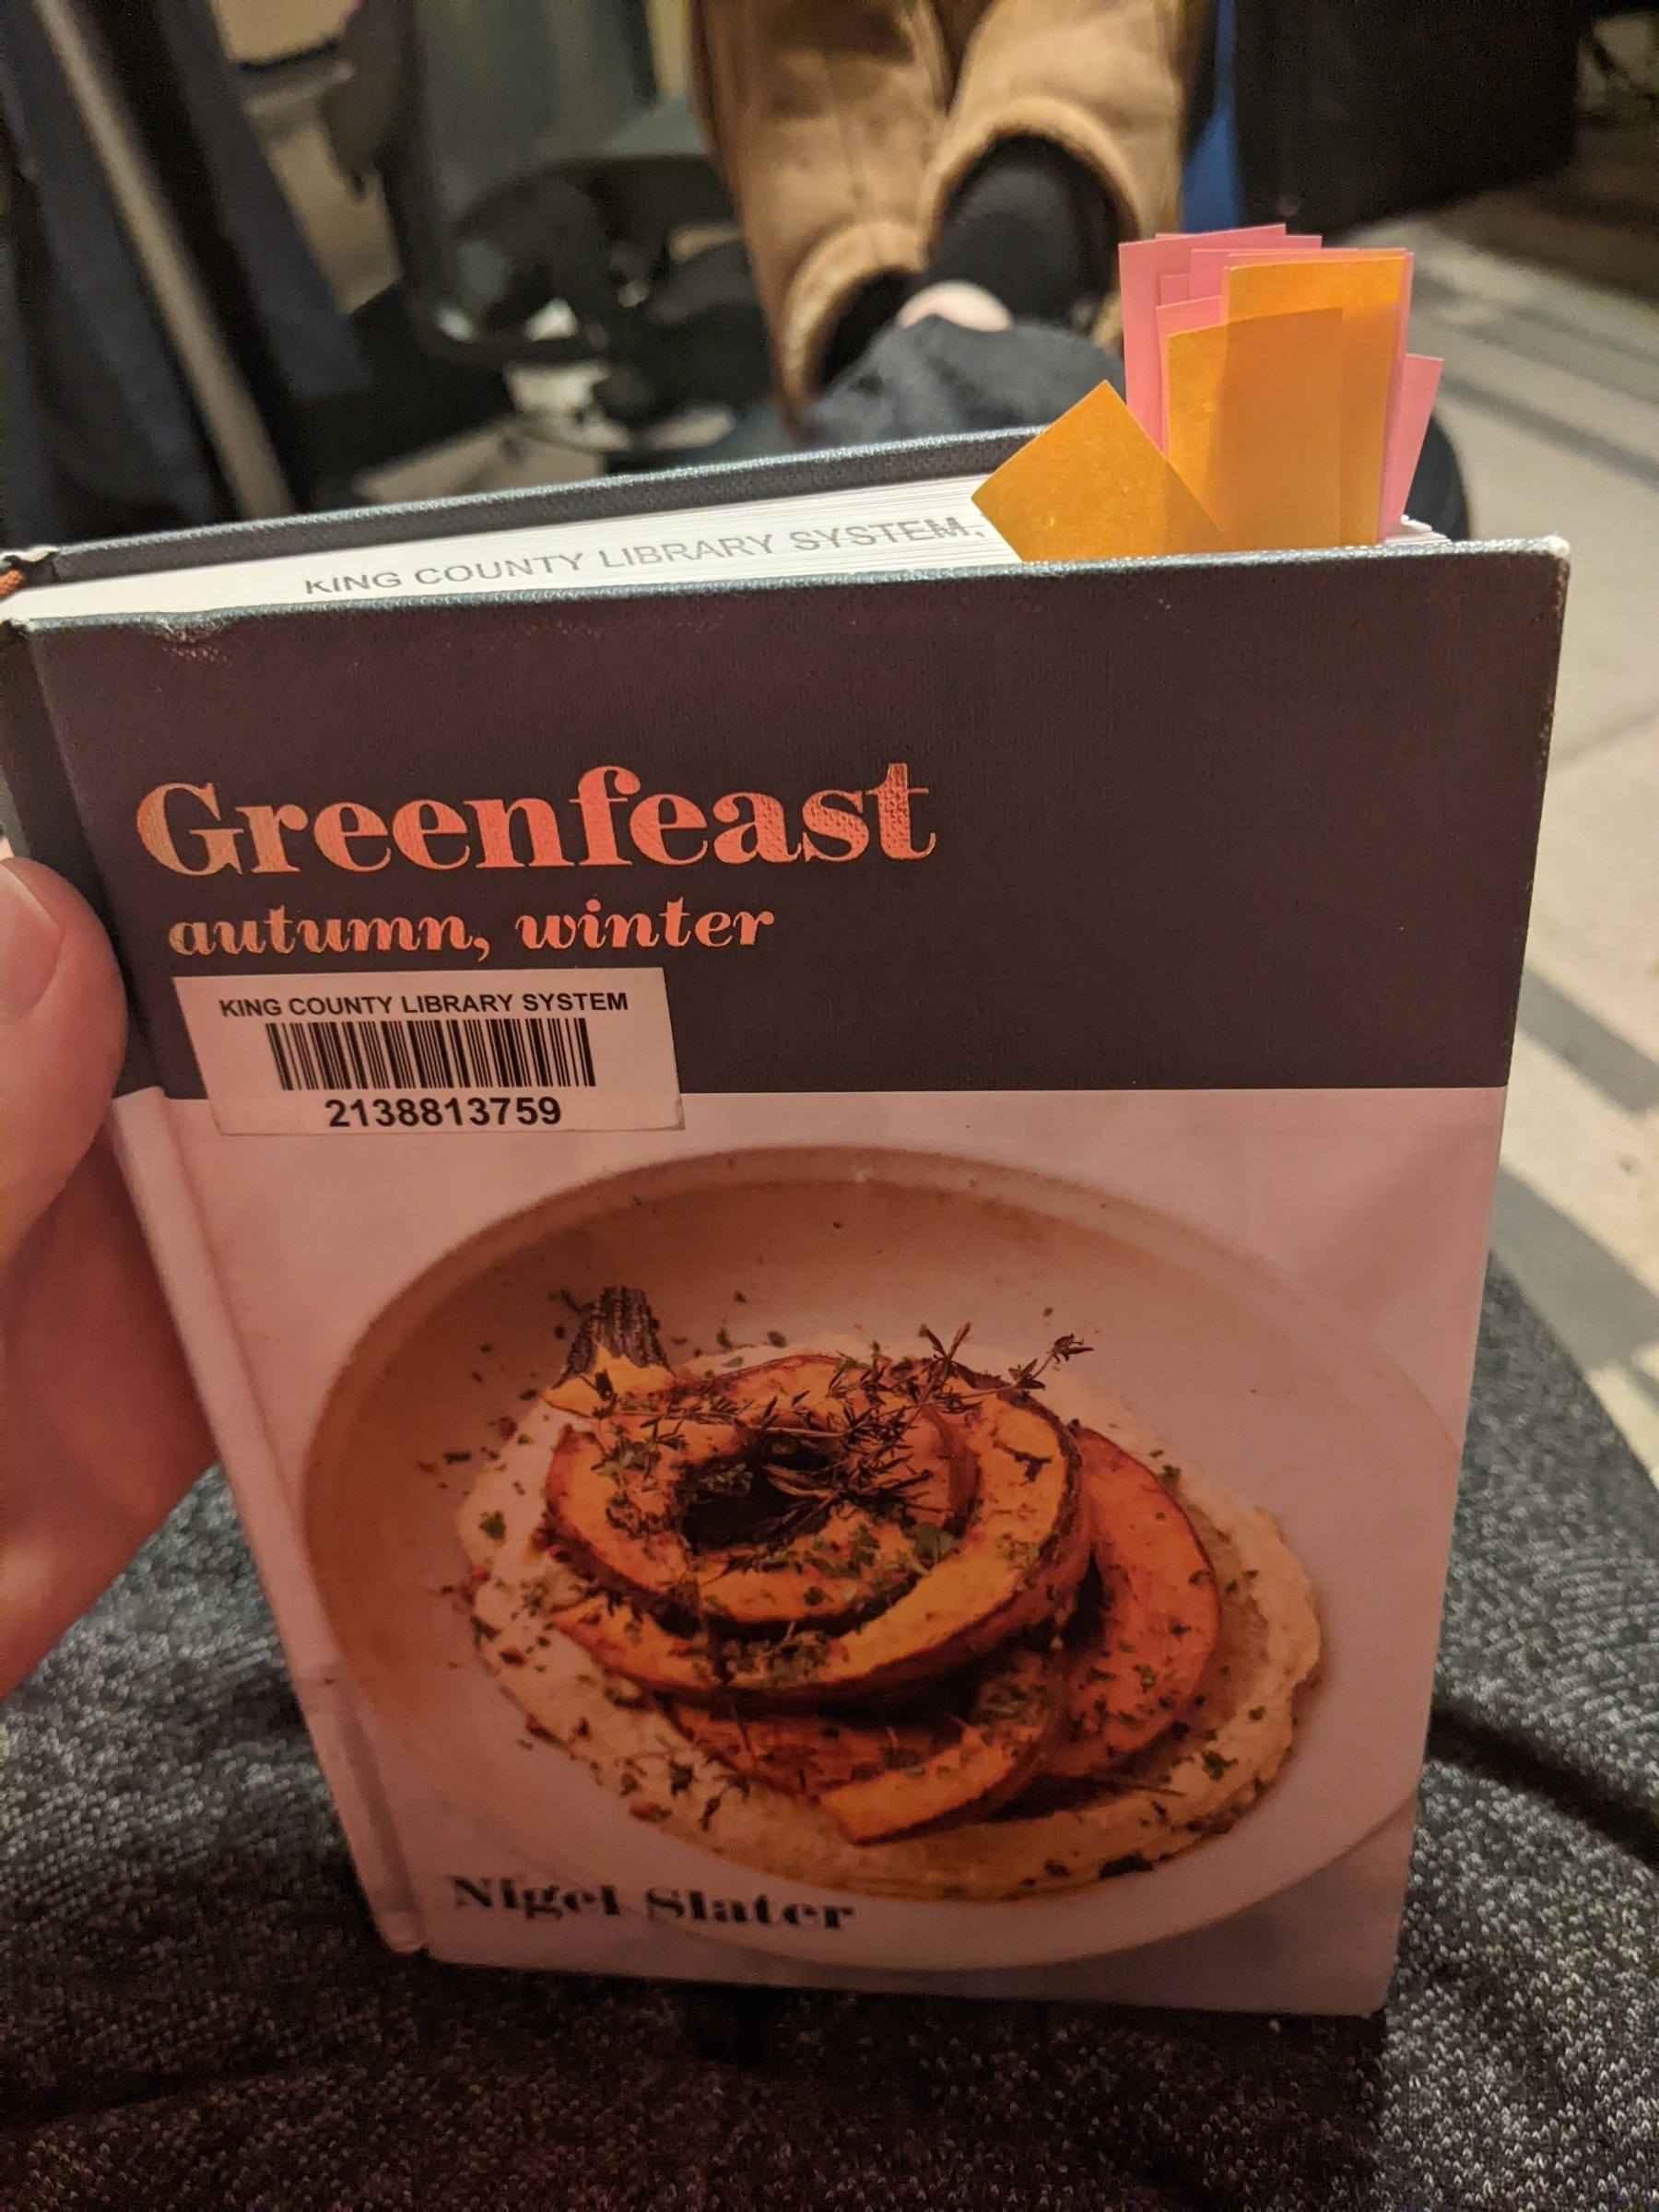 Petite hardcover cookbook from the library bristling with post-it flagged recipes